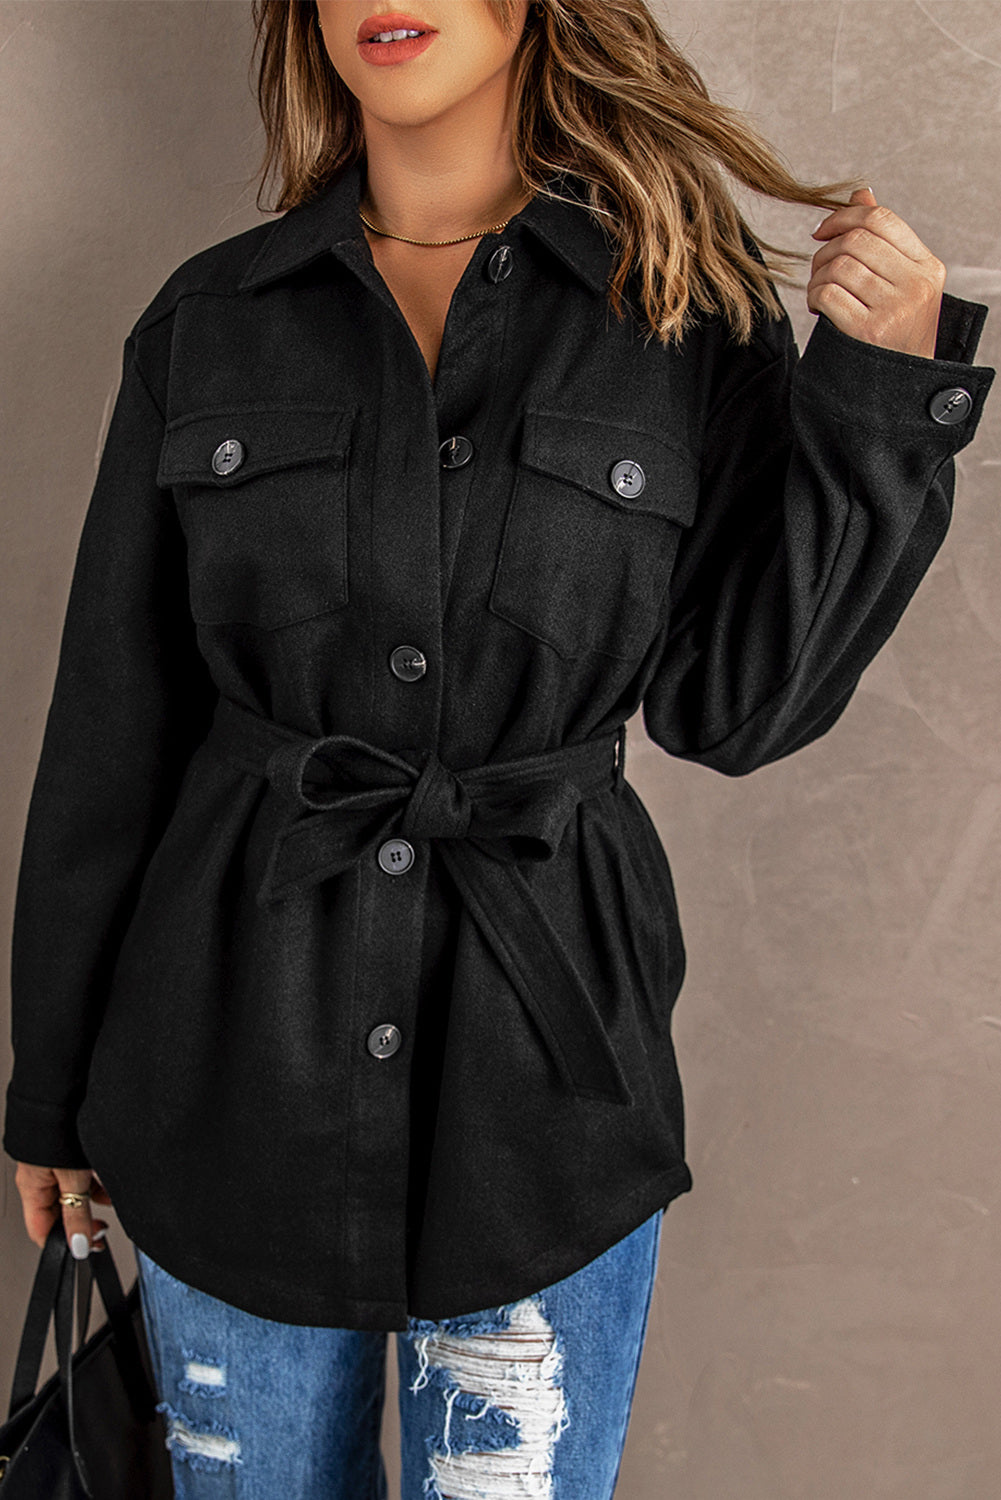 Black Women's Lapel Button Down Coat Winter Belted Coat with Pockets LC8511359-2